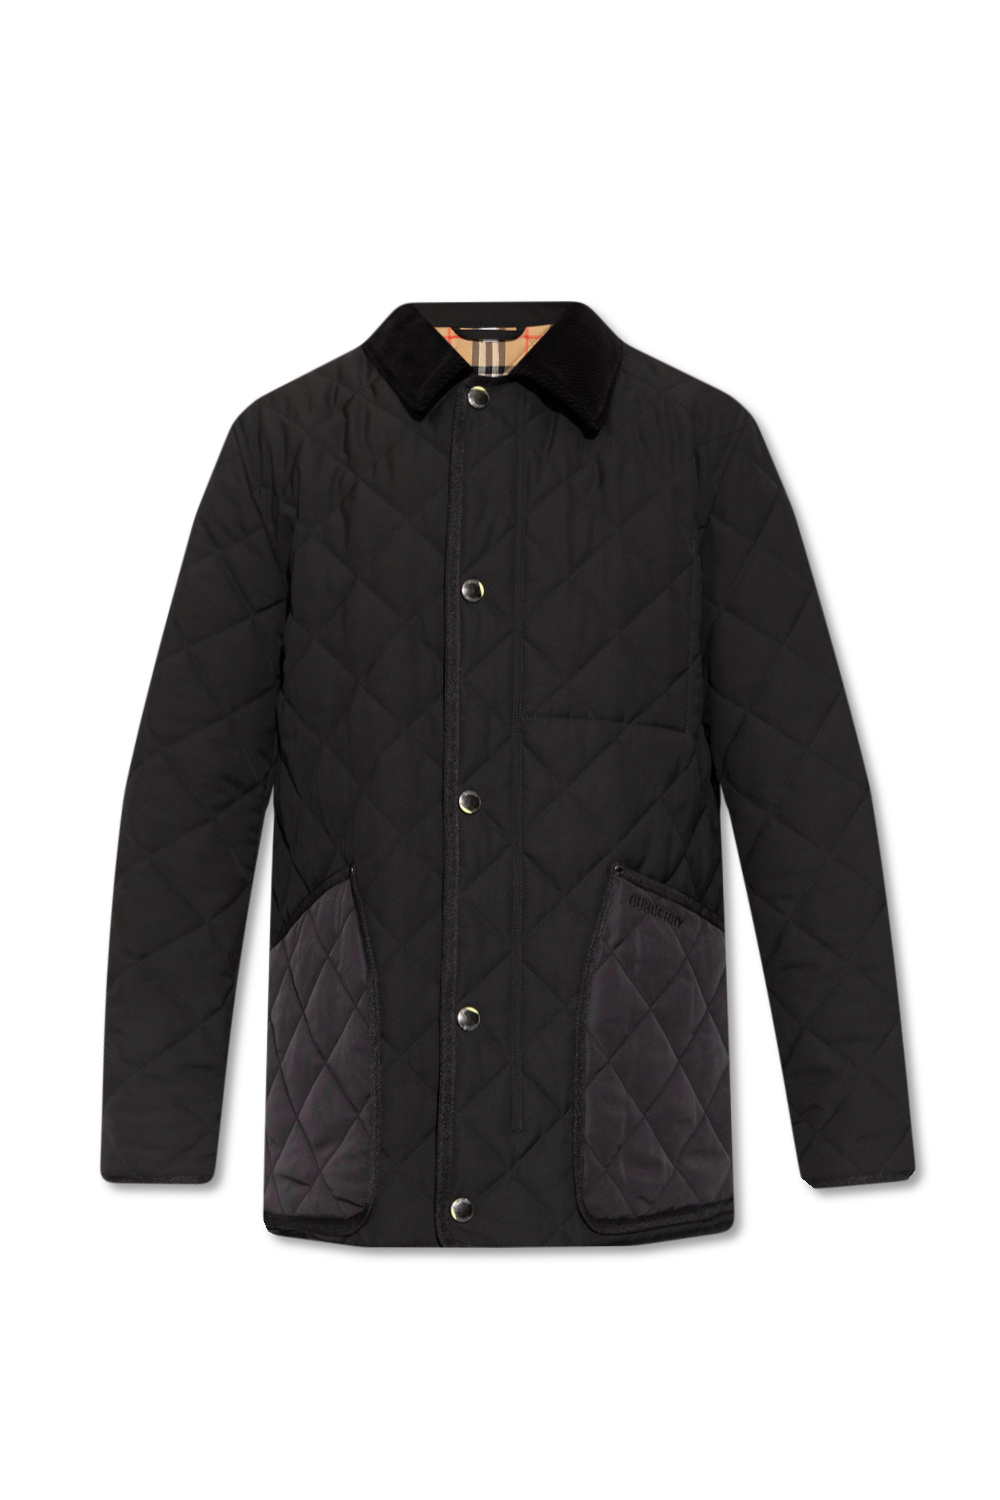 Burberry ‘Lanford’ insulated jacket